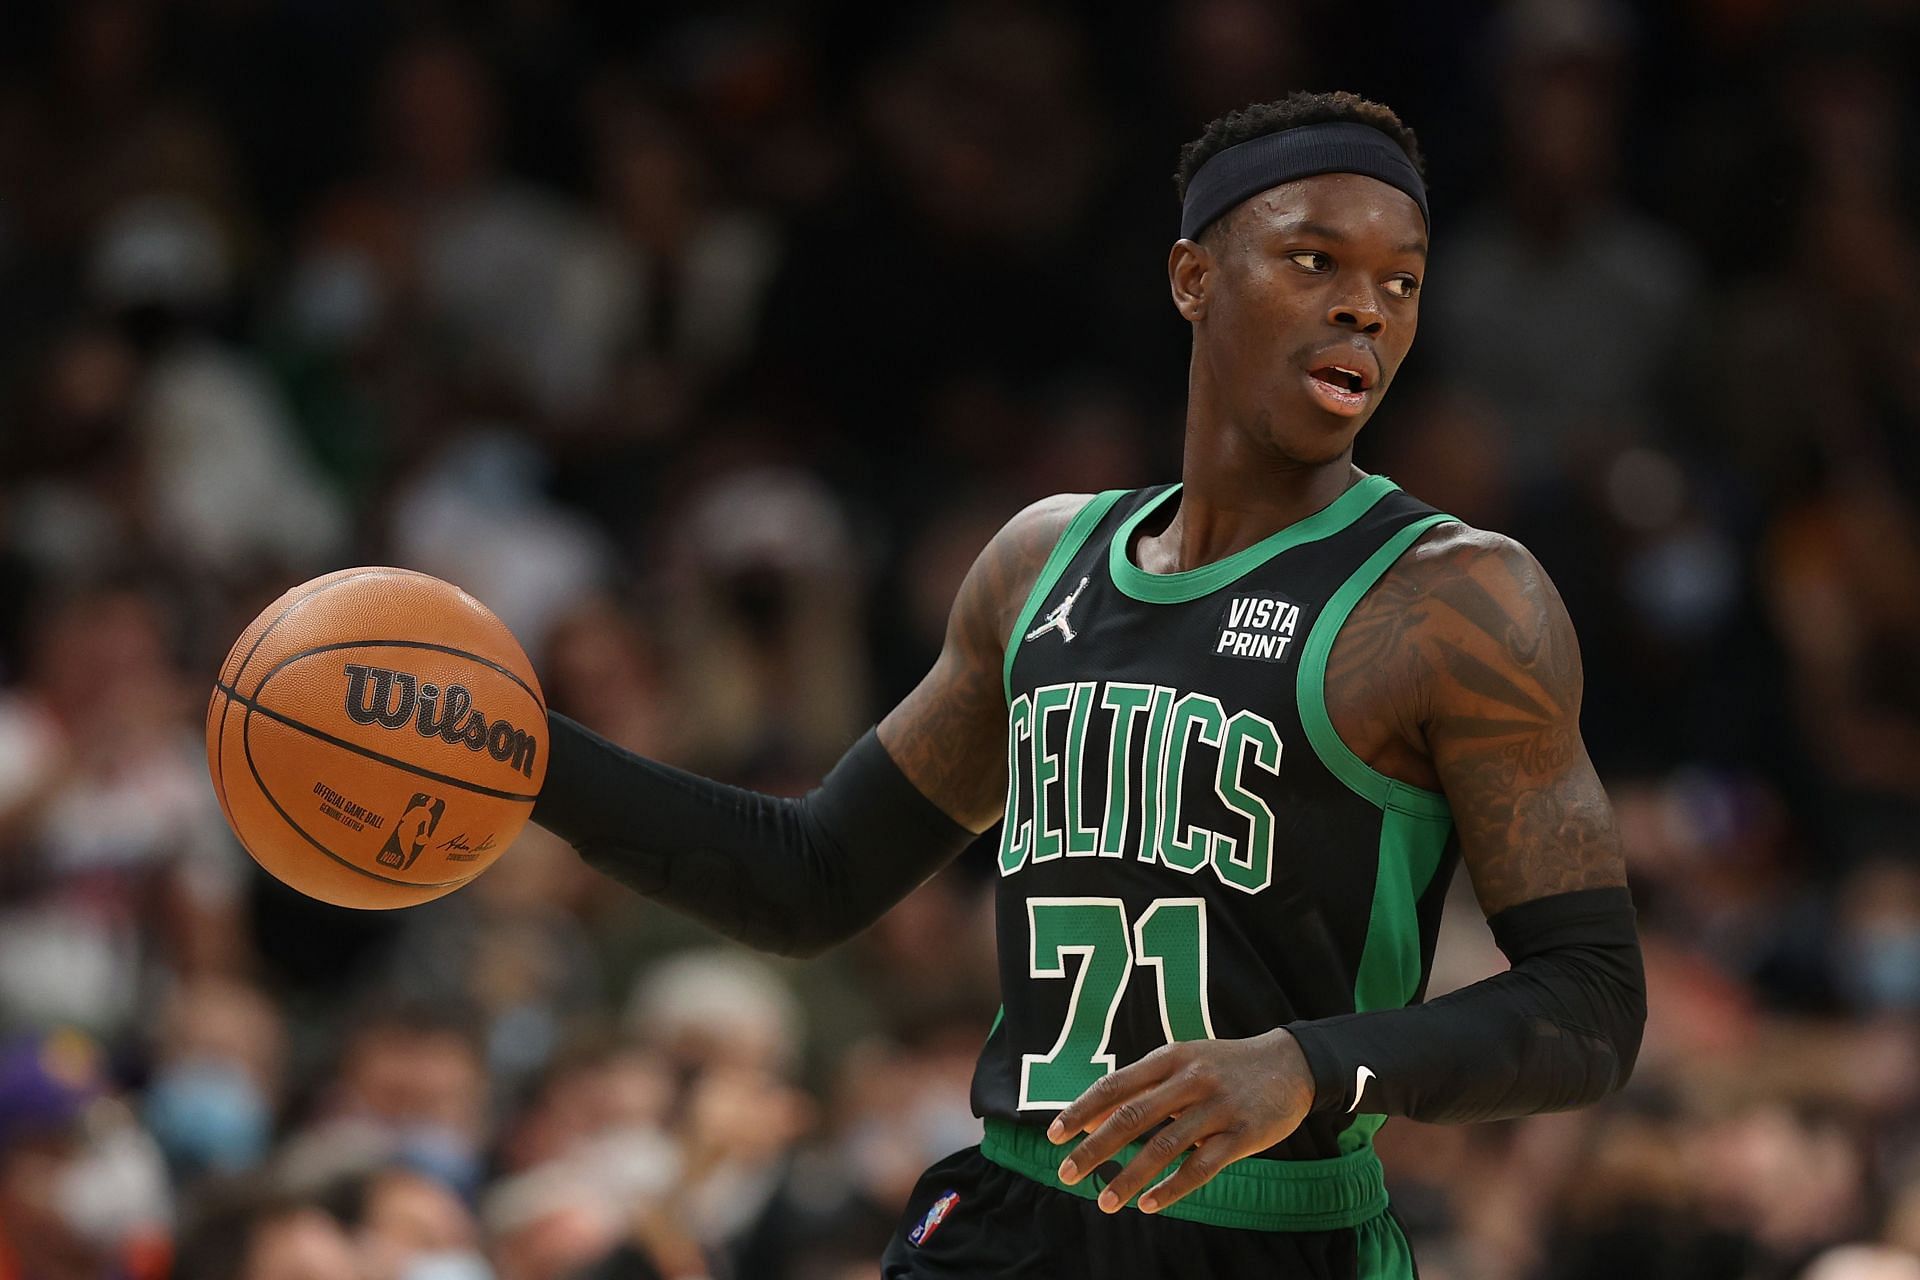 Dennis Schroder has played a supporting role for the Boston Celtics